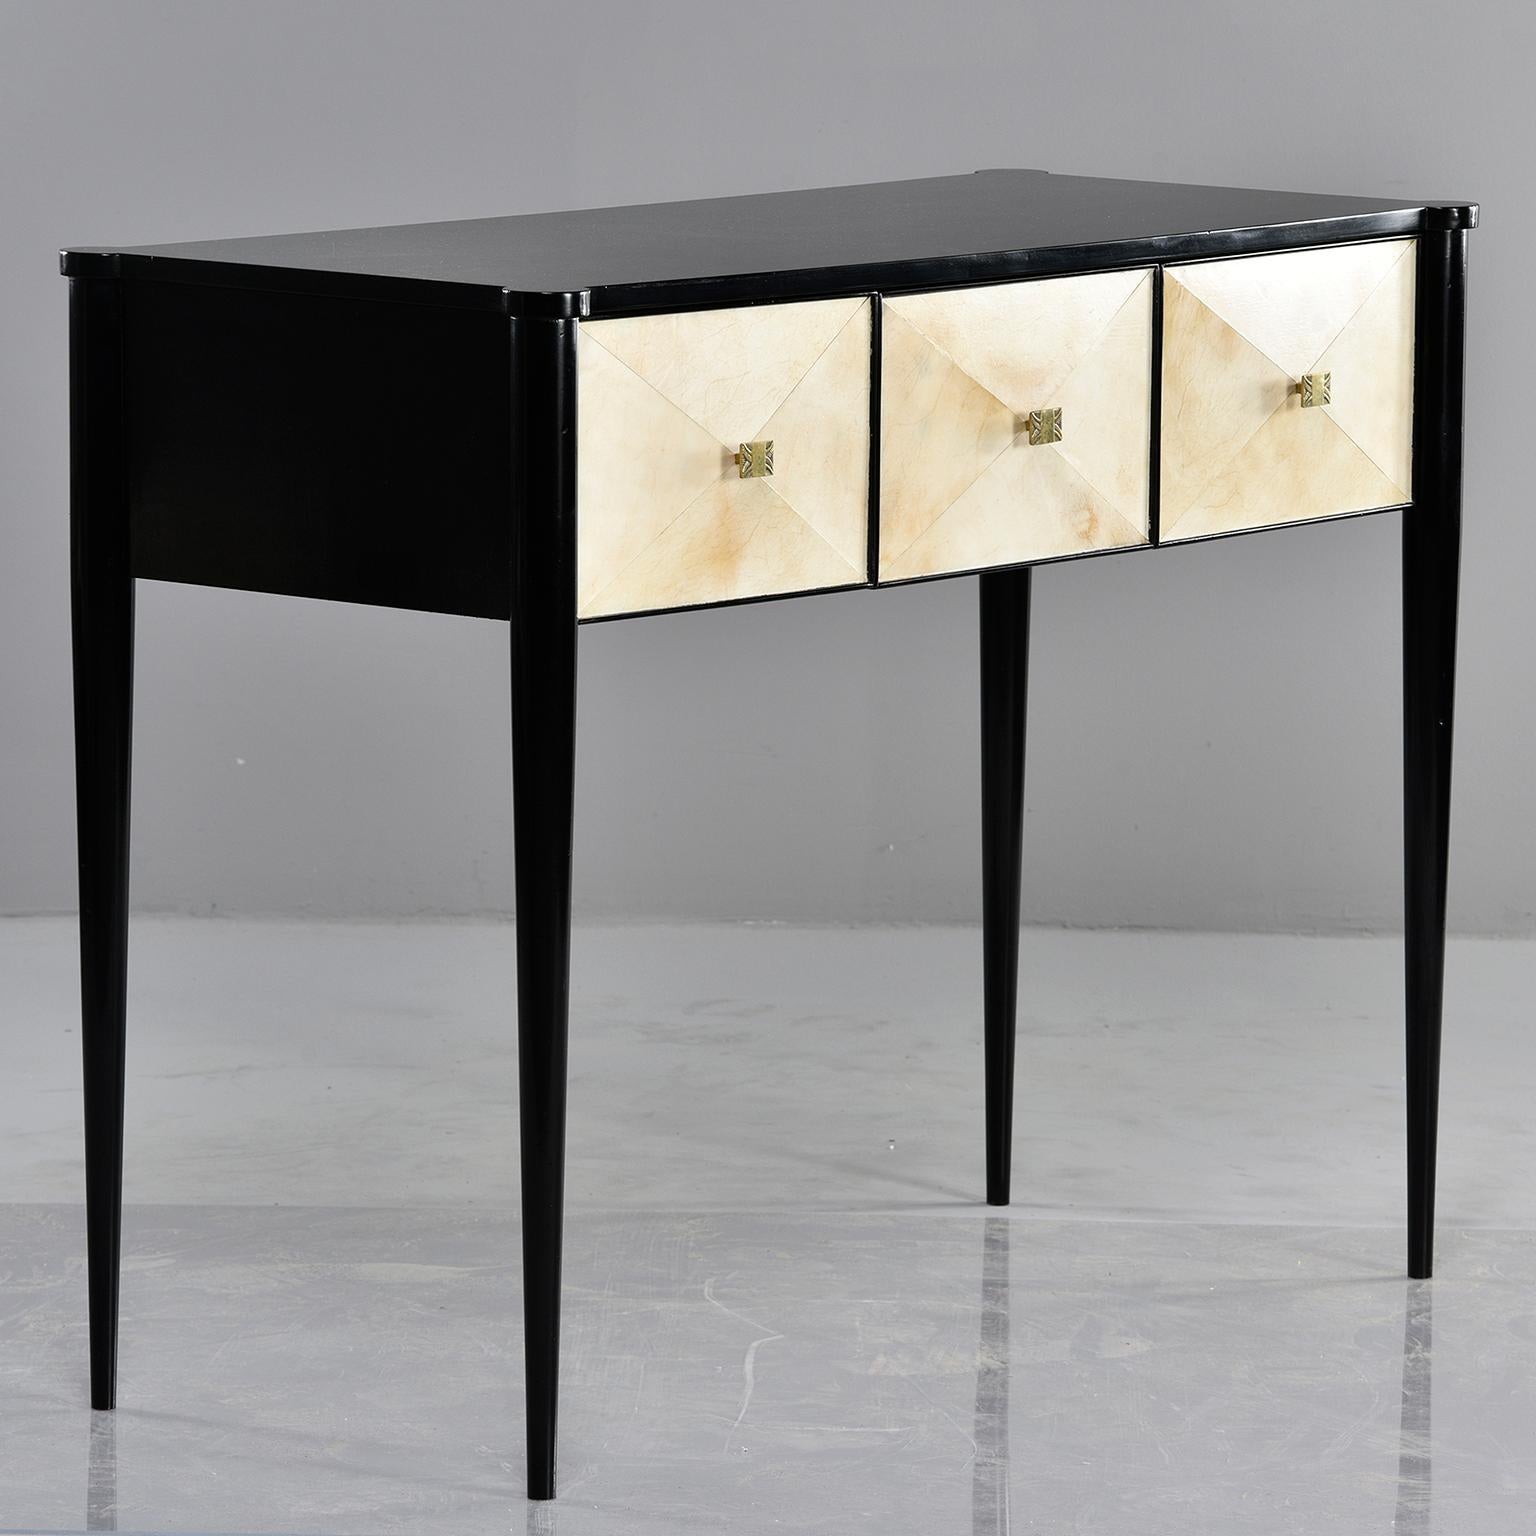 Custom created by English cabinet maker, this console has an ebonized wood frame with tapered legs and three functional drawers with vellum covered fronts. Brass hardware.